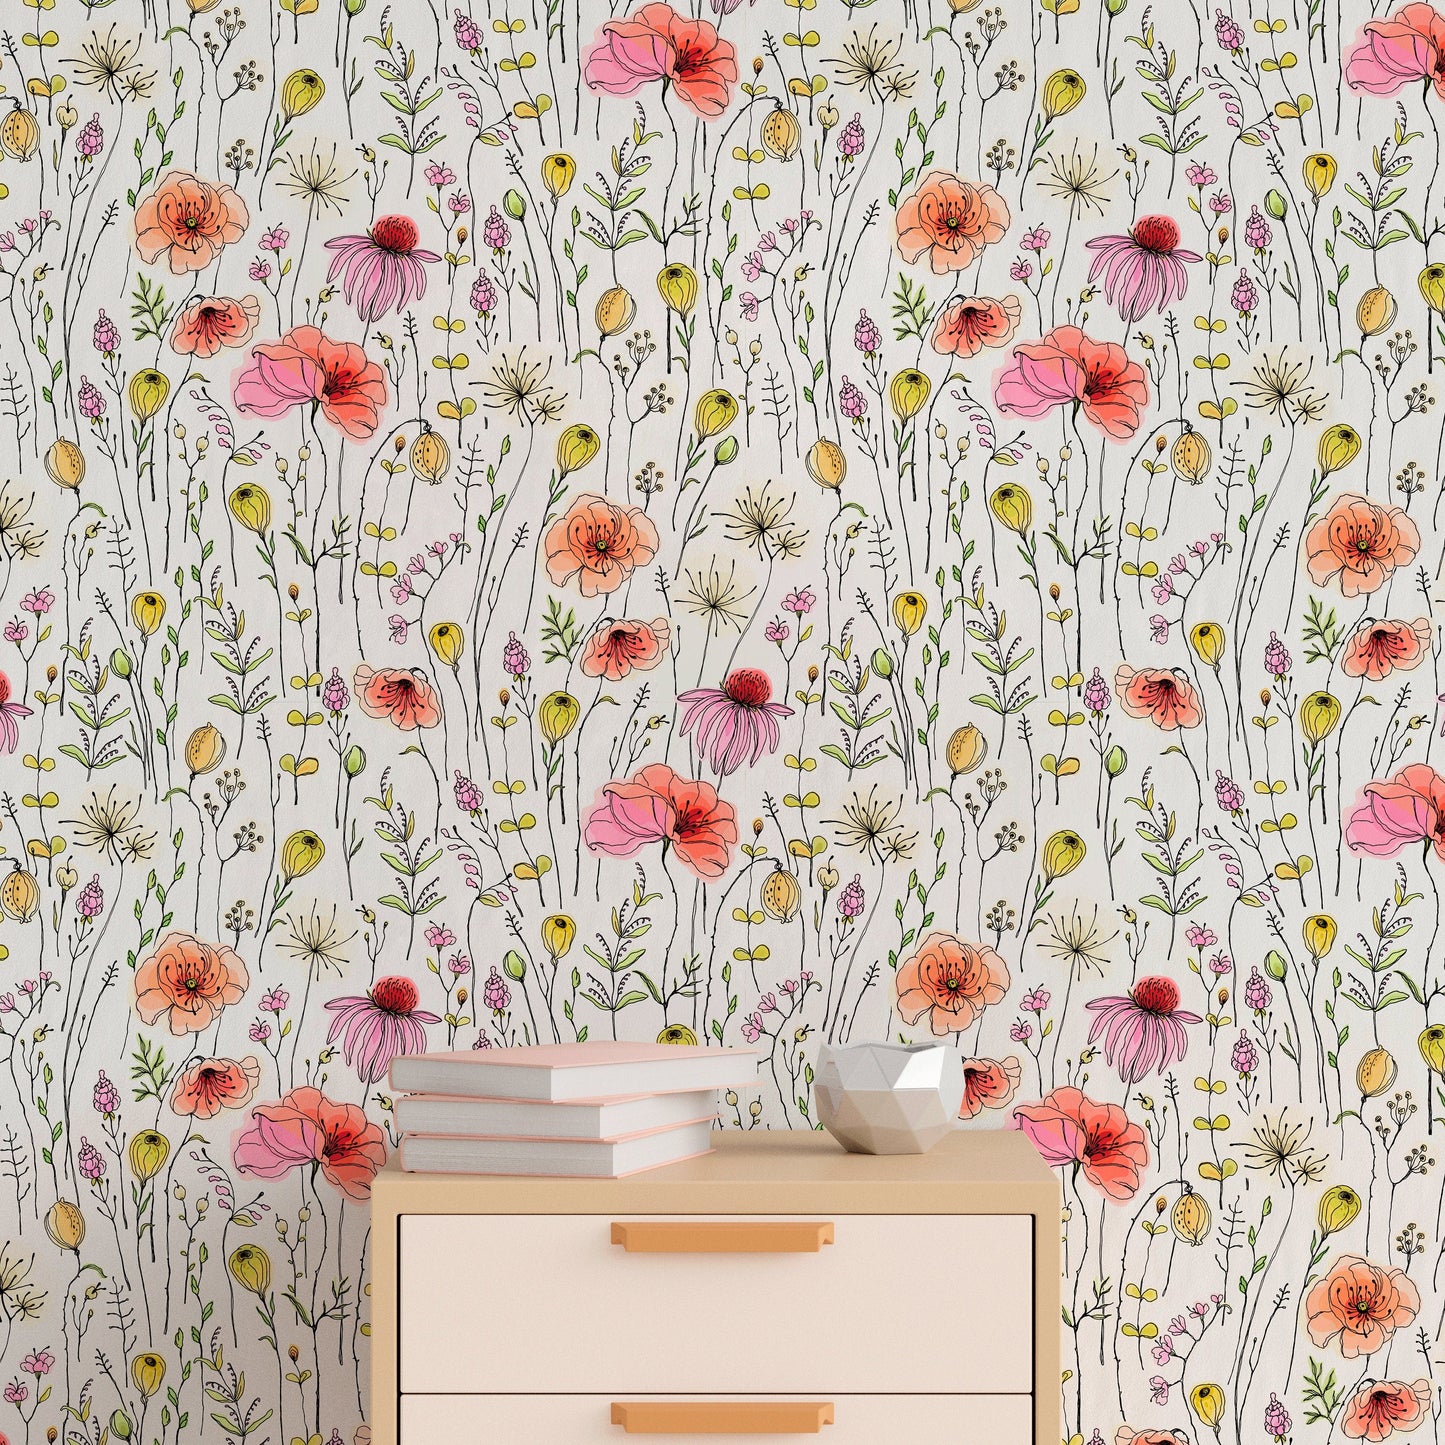 Removable Wallpaper Peel and Stick Wallpaper Wall Paper Wall Mural - Vintage Floral Wallpaper - B018